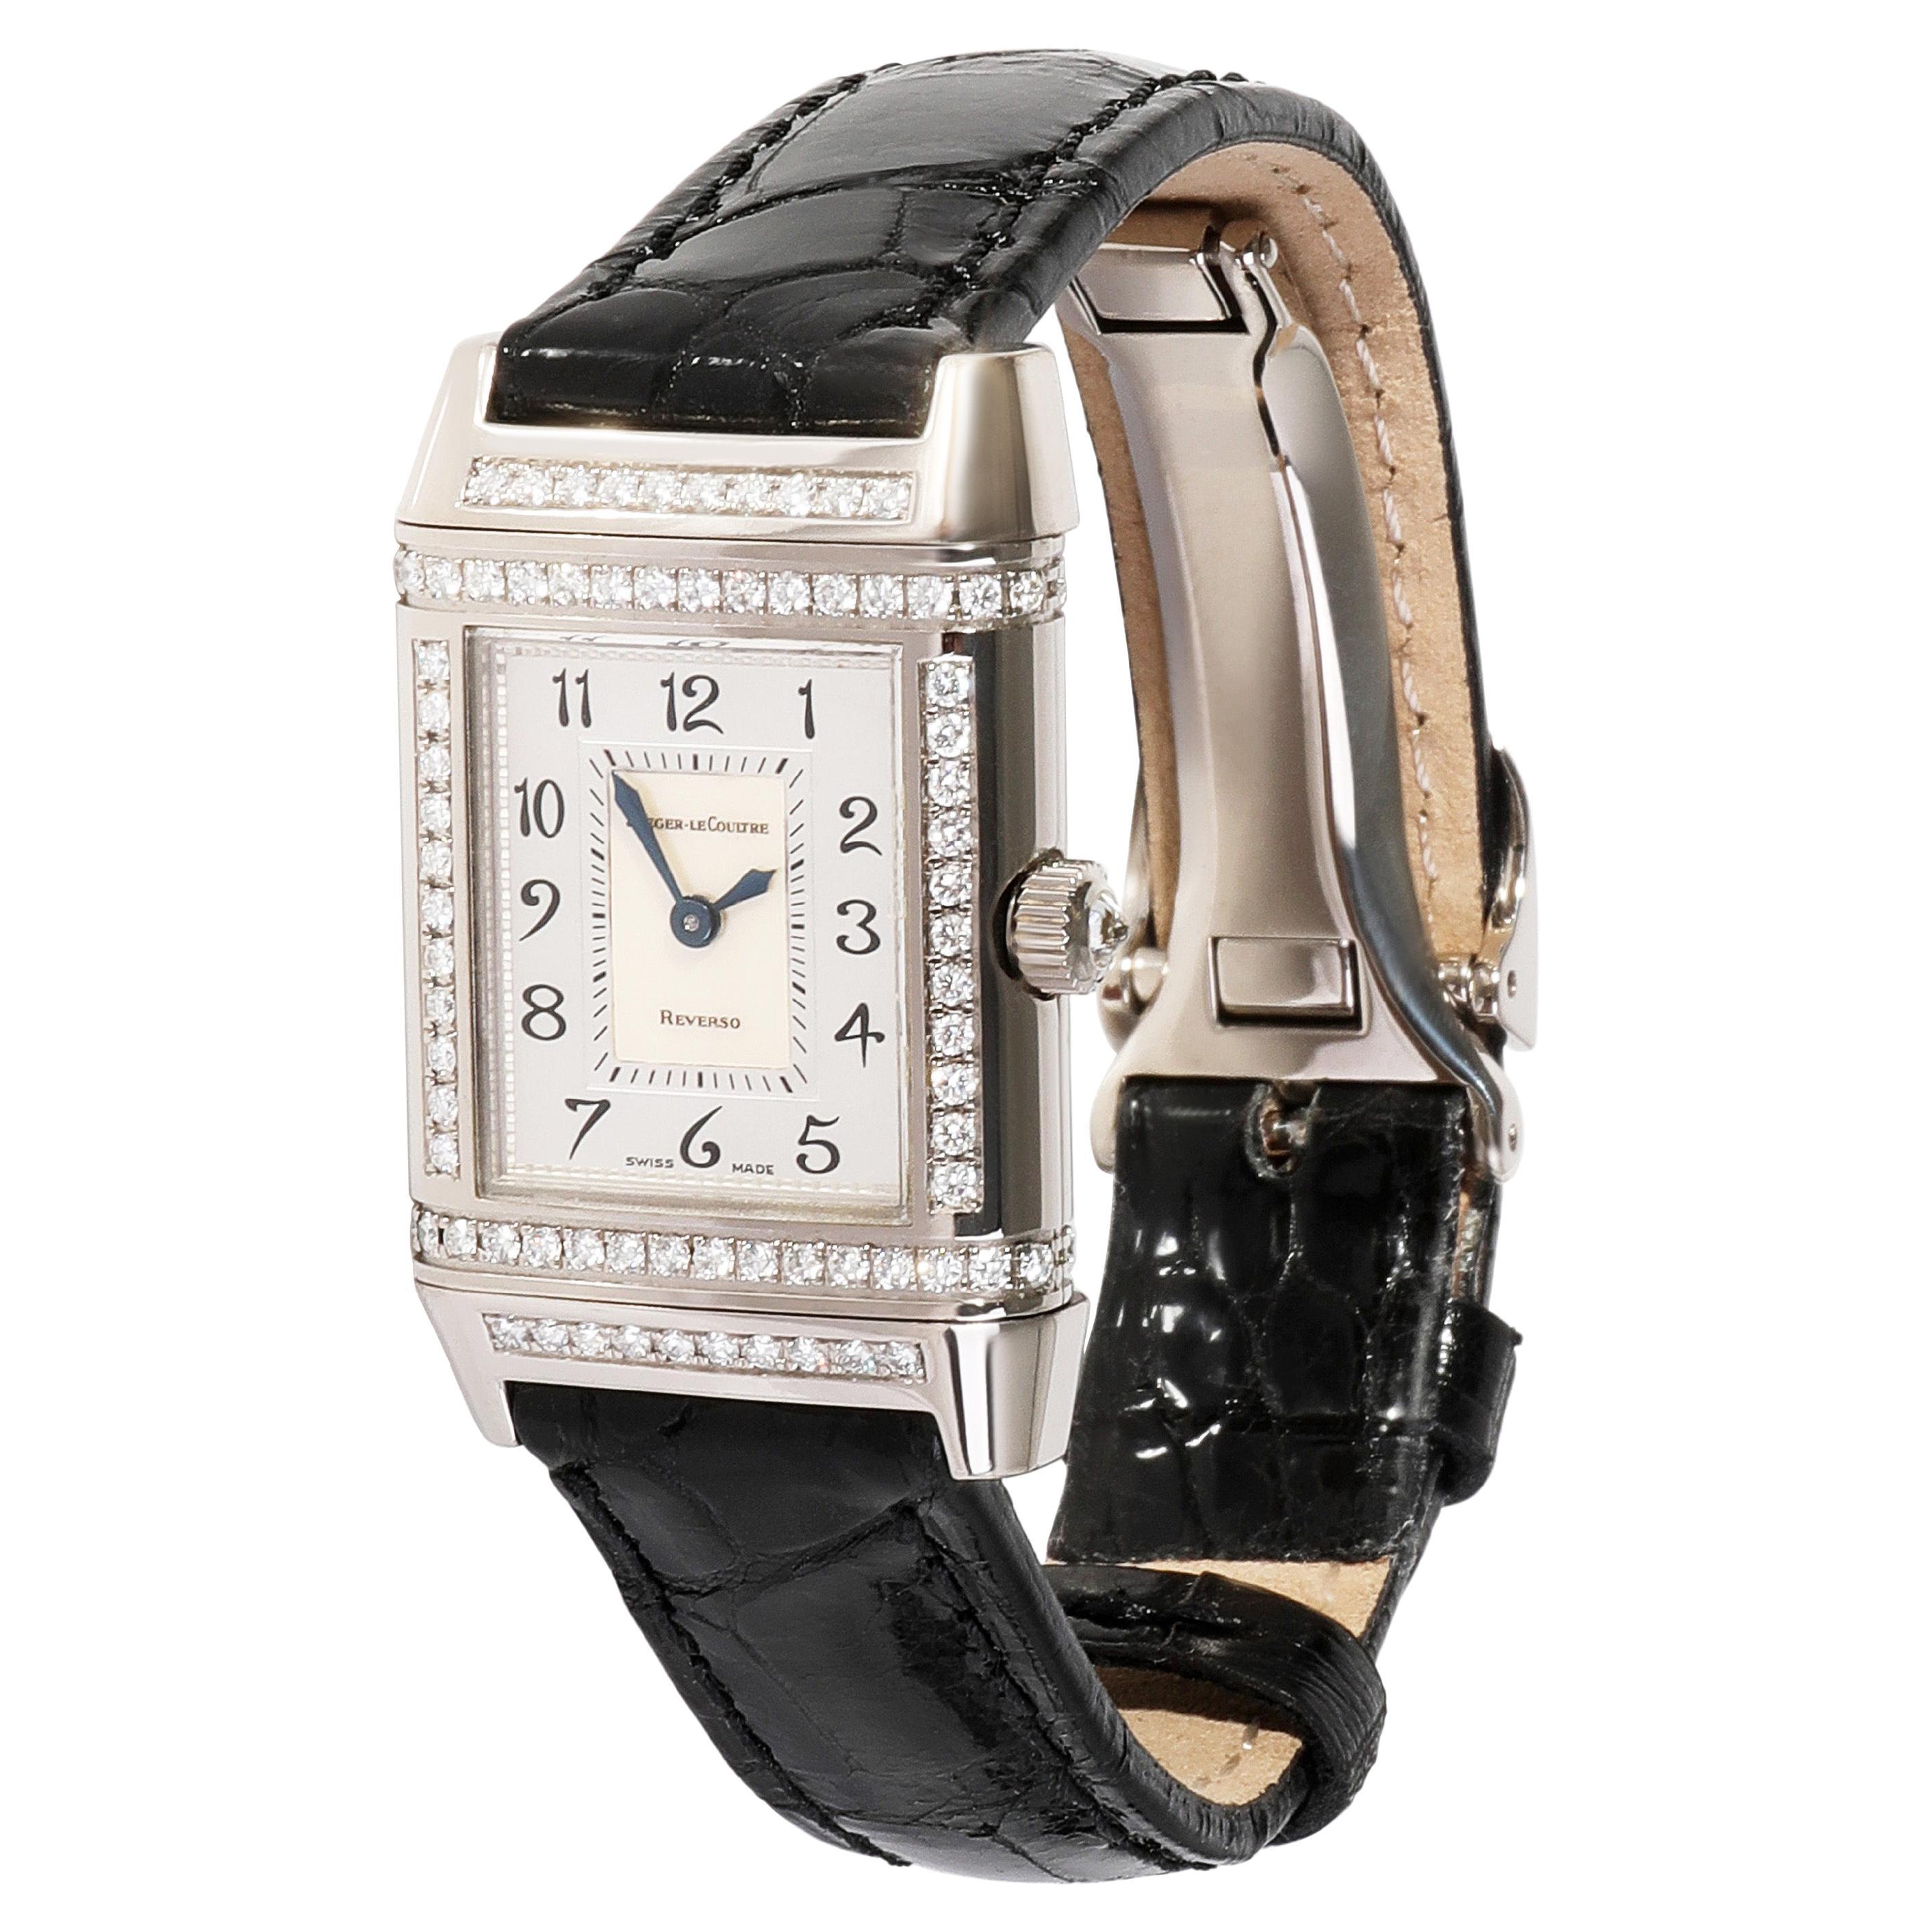 Jaeger-LeCoultre Duetto Reverso 266.3.44 Women's Watch in 18kt White Gold